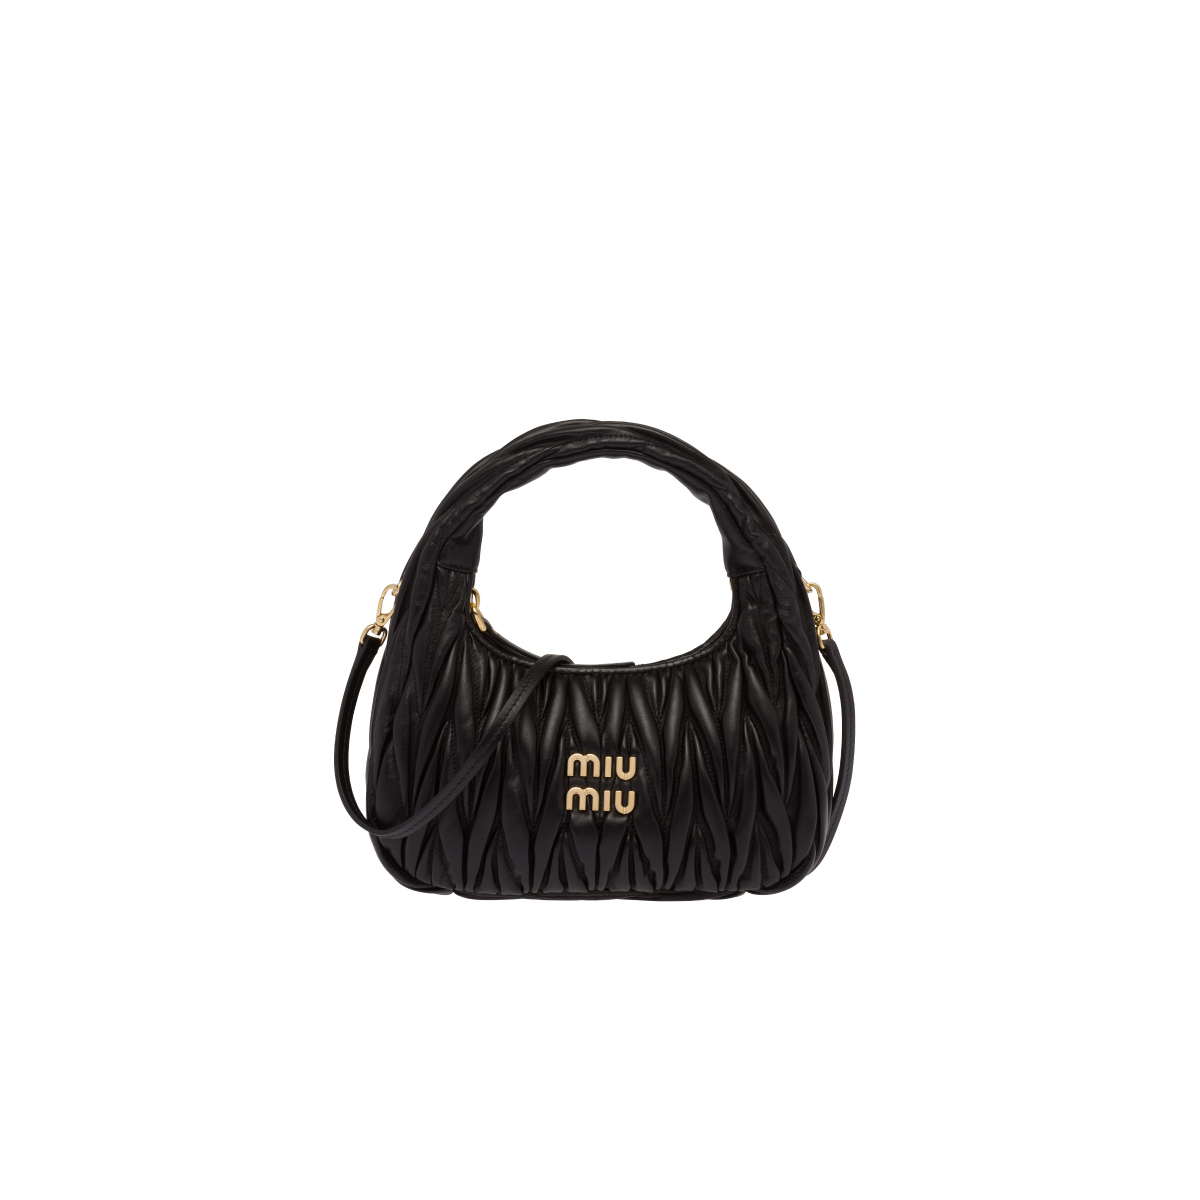 Prada loafers and Miu Miu pocket bags are topping sales for the